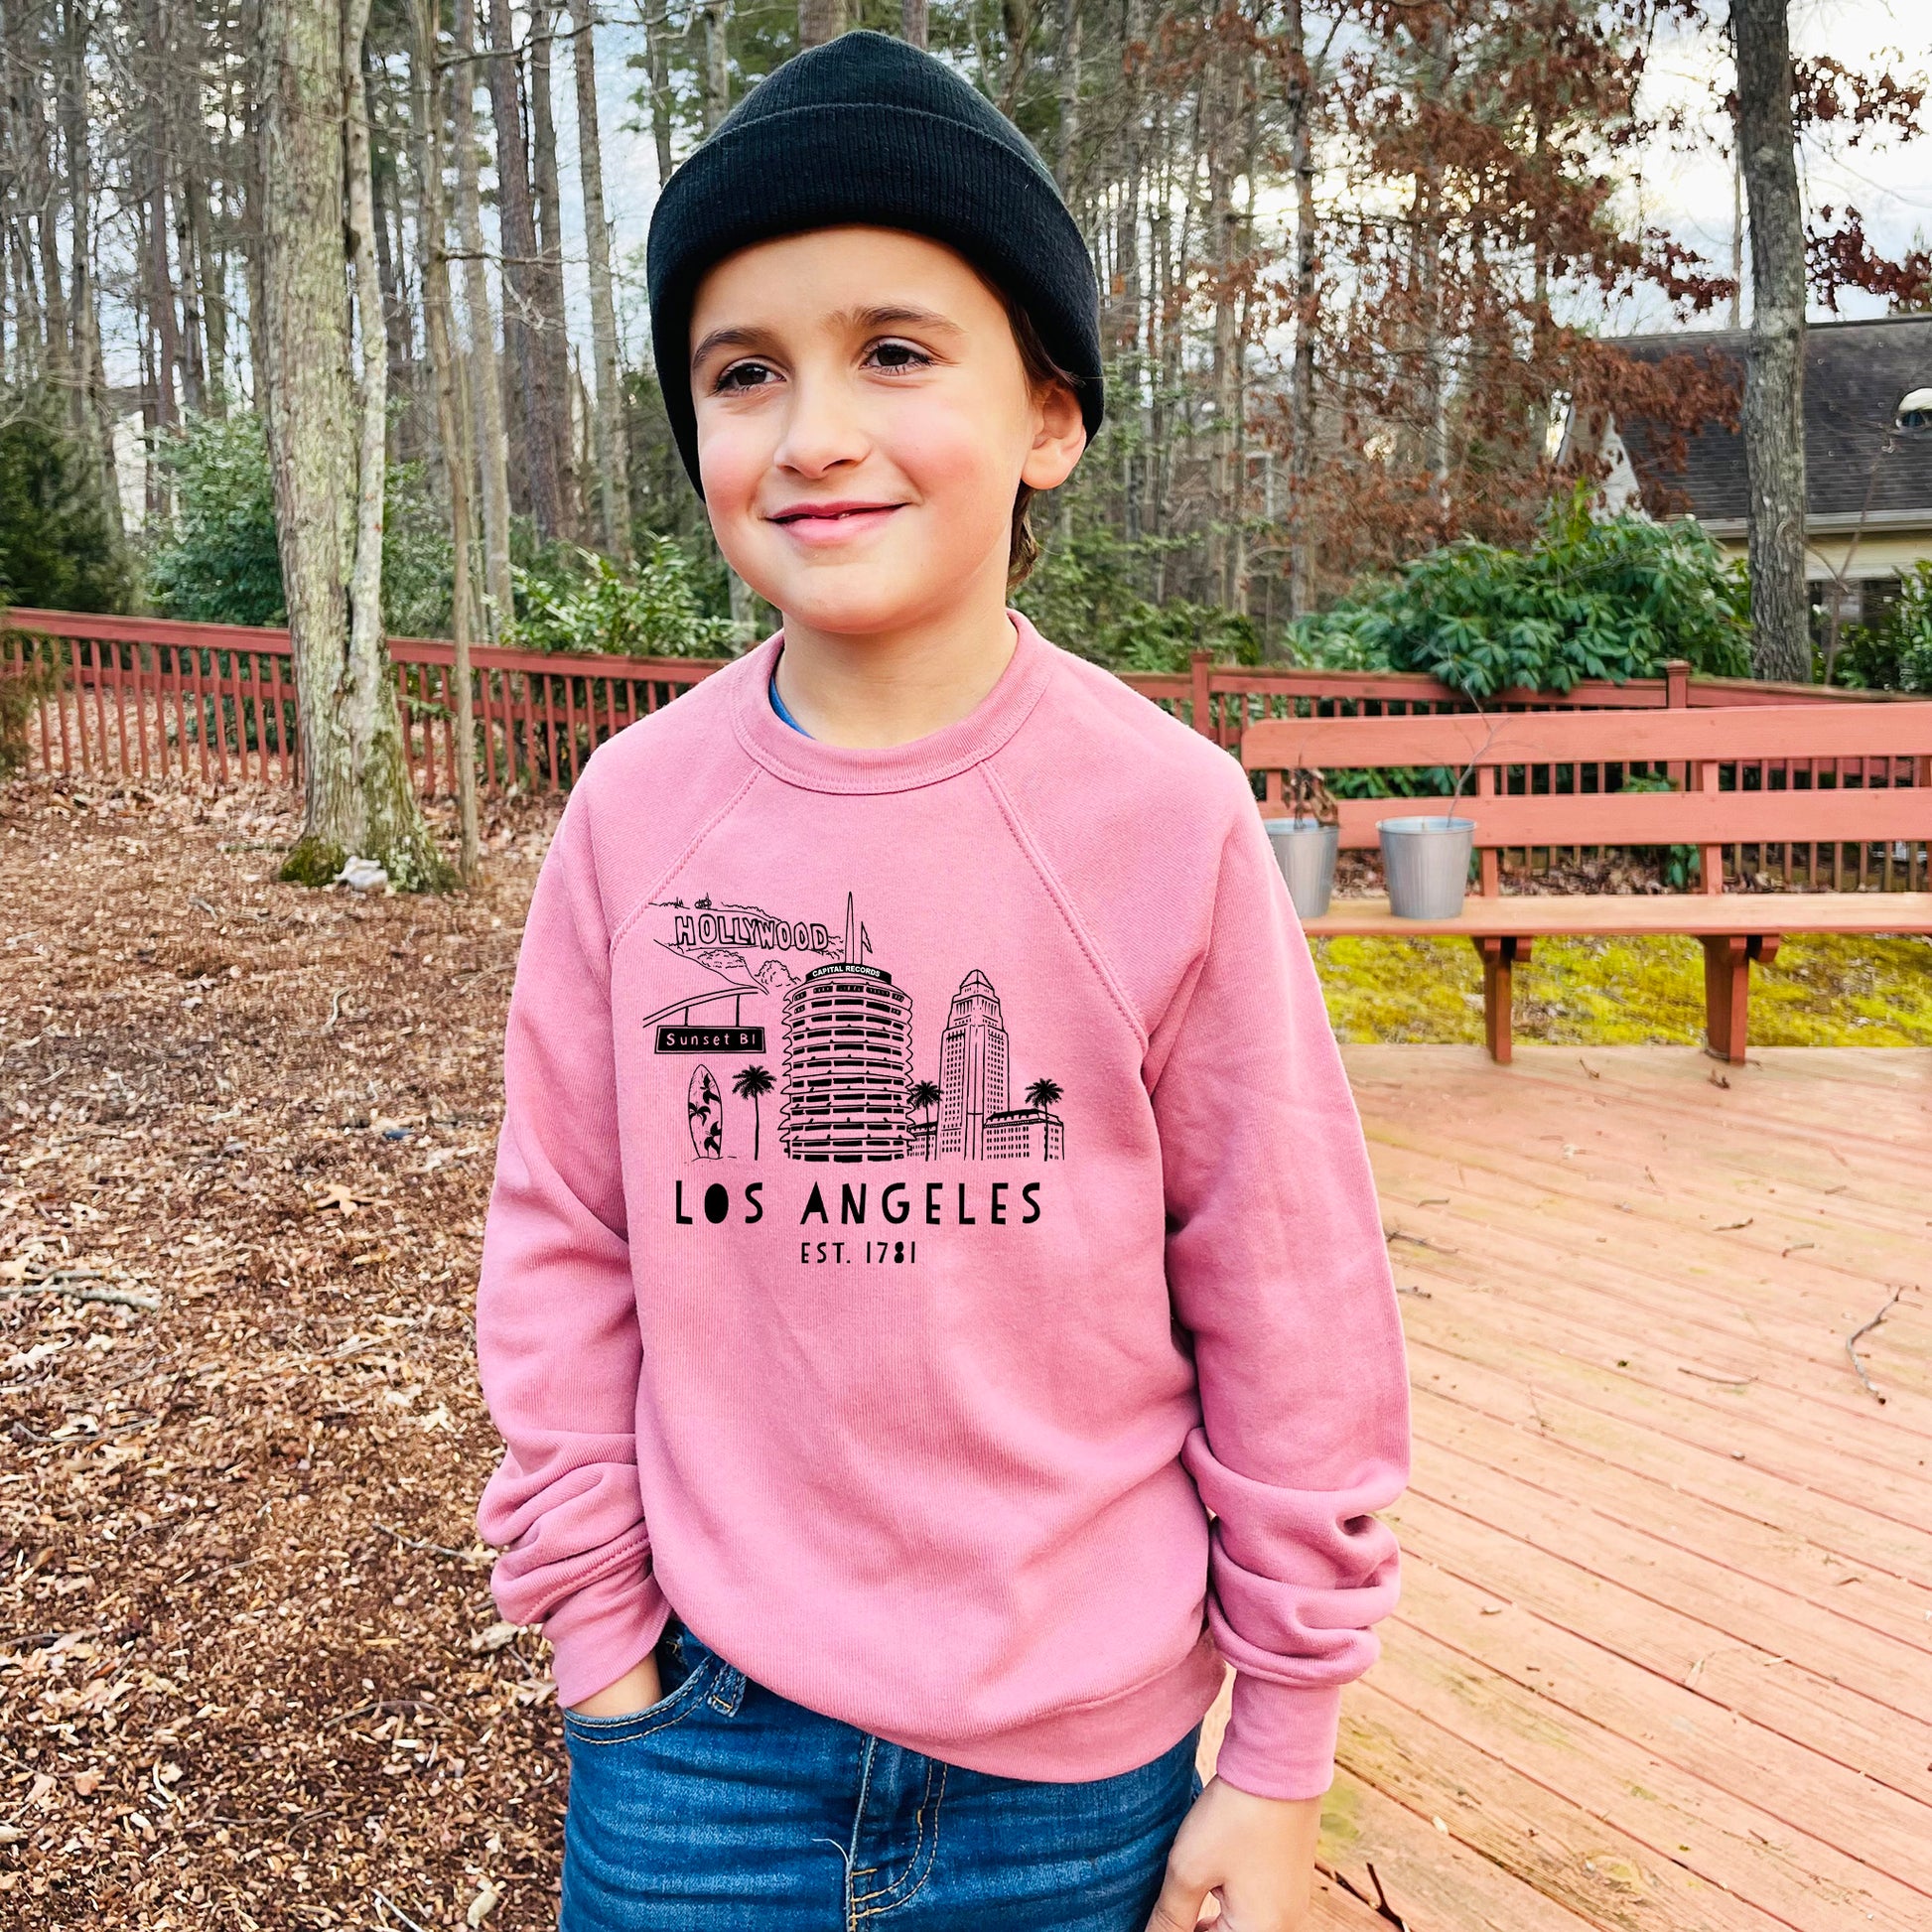 a young boy standing on a deck wearing a pink los angeles sweatshirt